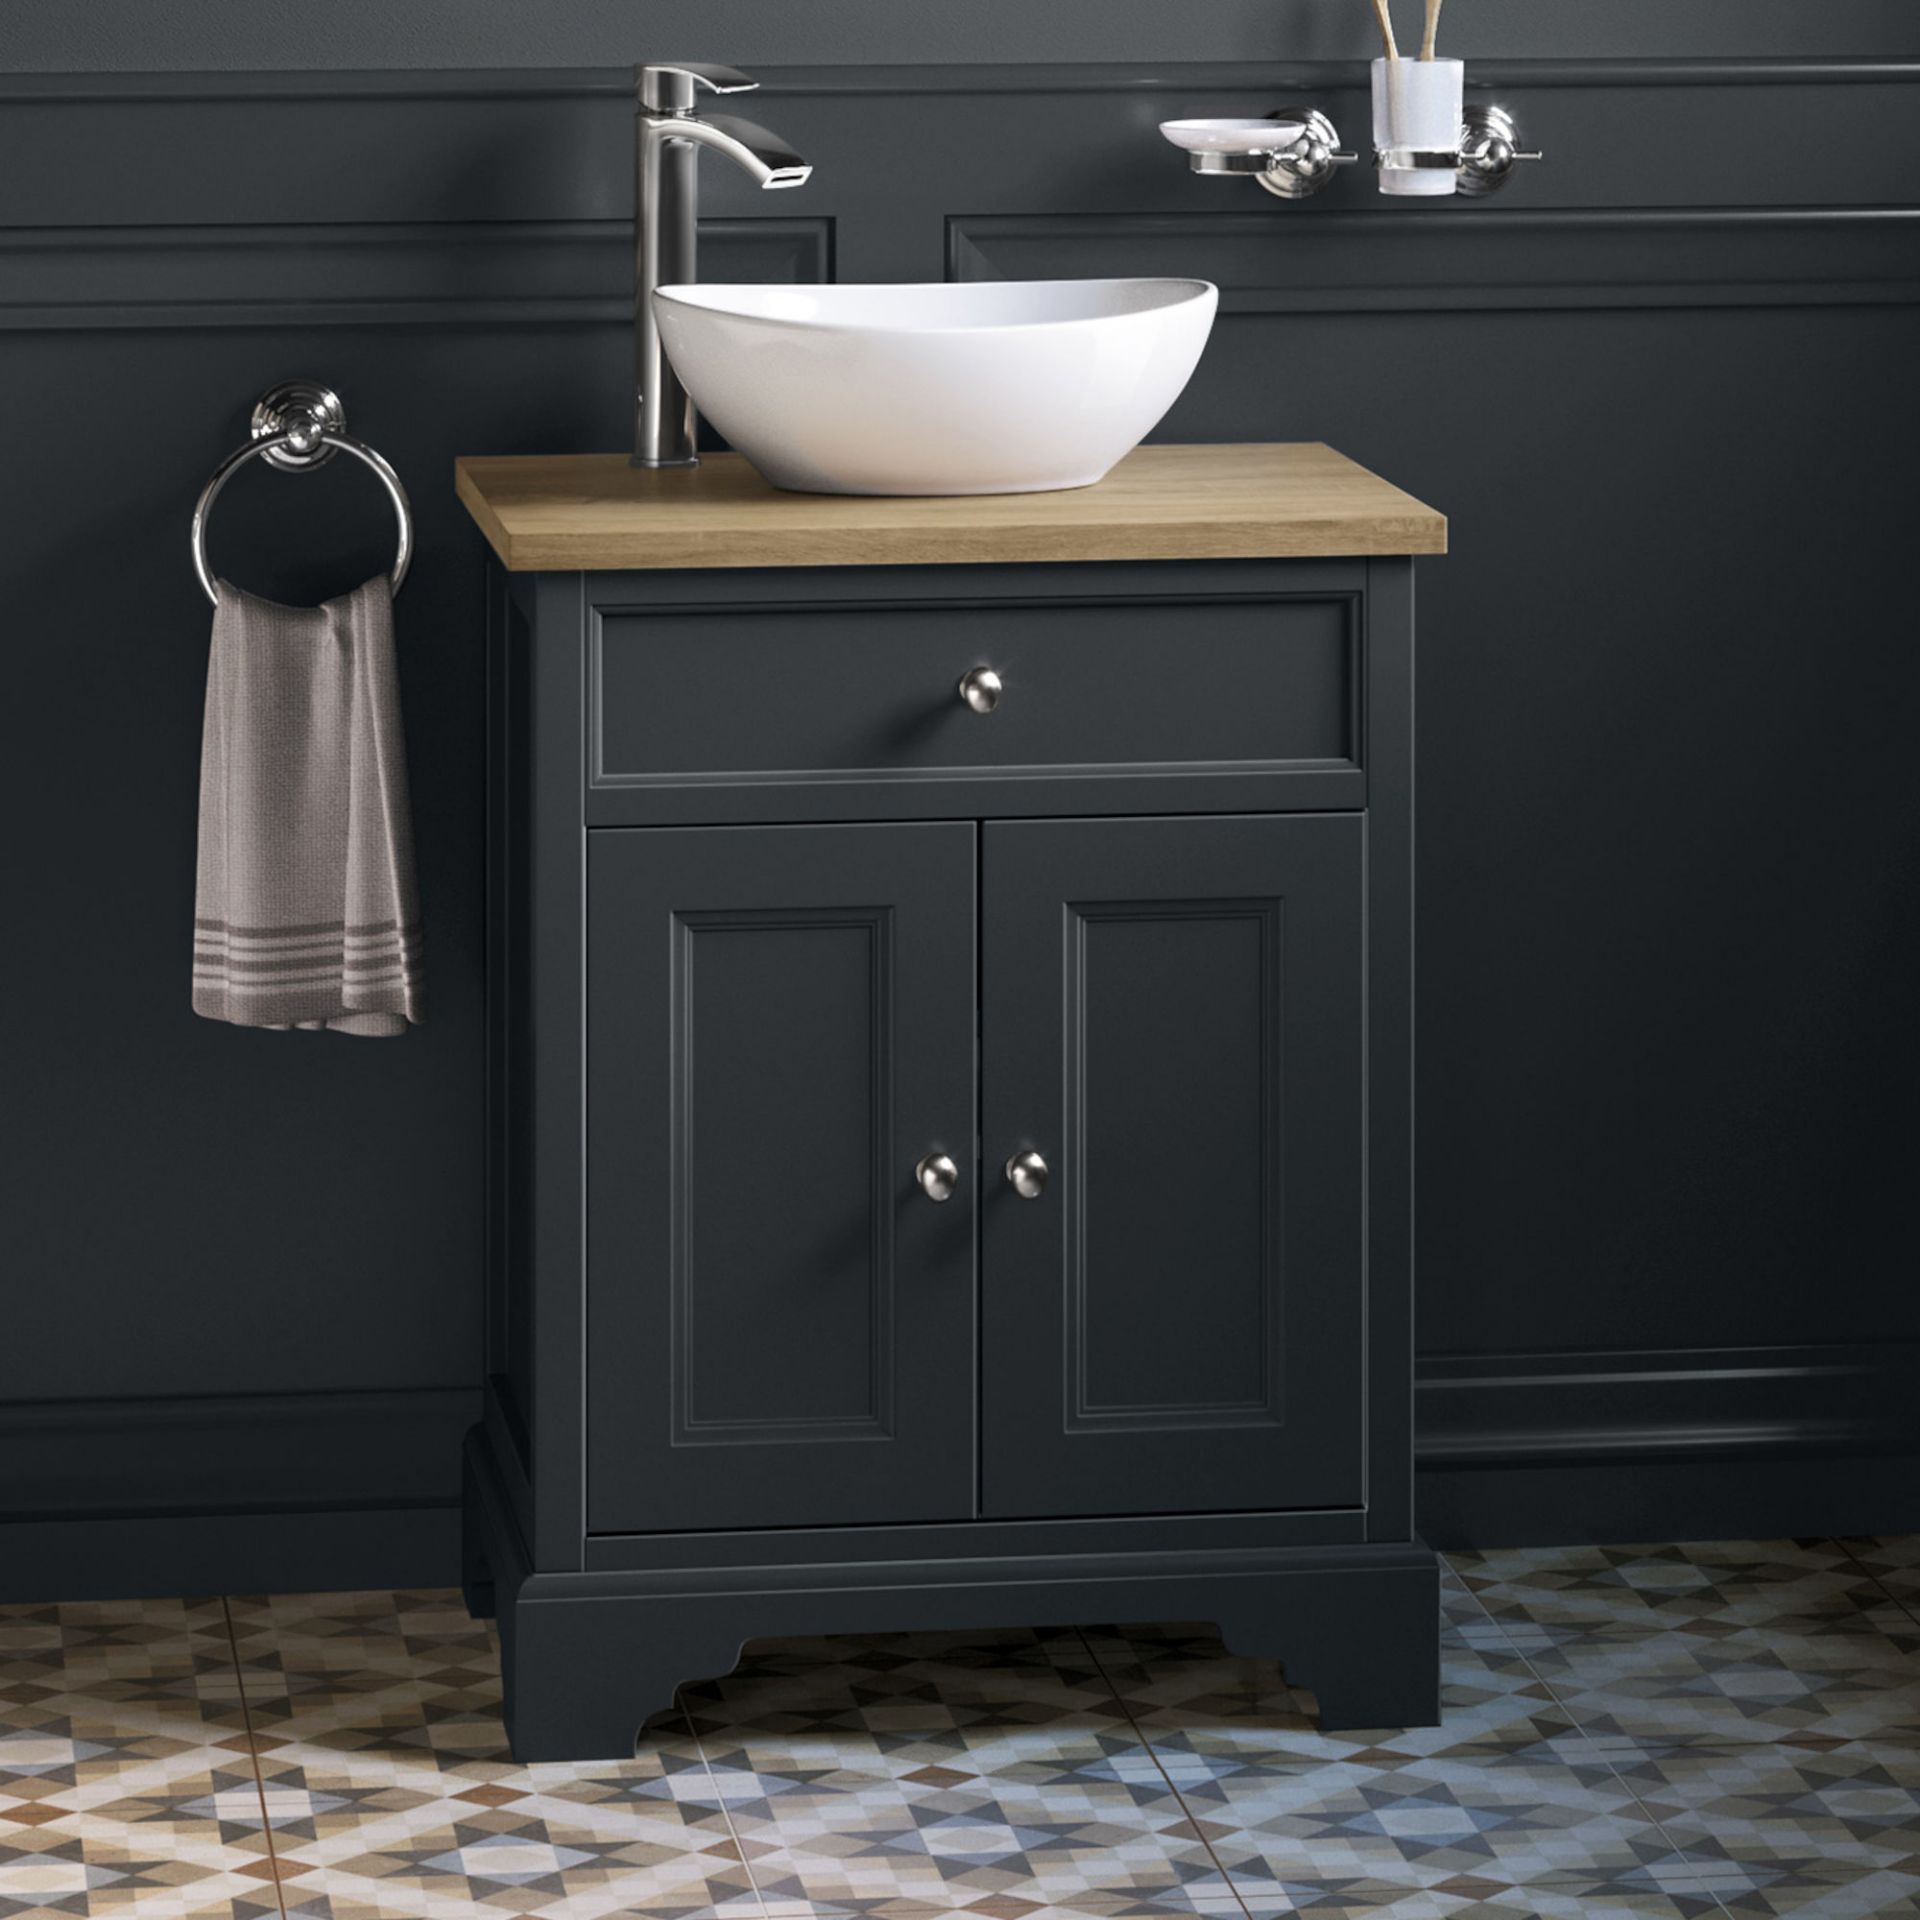 (PM12) 600mm Loxley Charcoal Countertop Unit & Camila Sink - Floor Standing. RRP £799.99. Come...